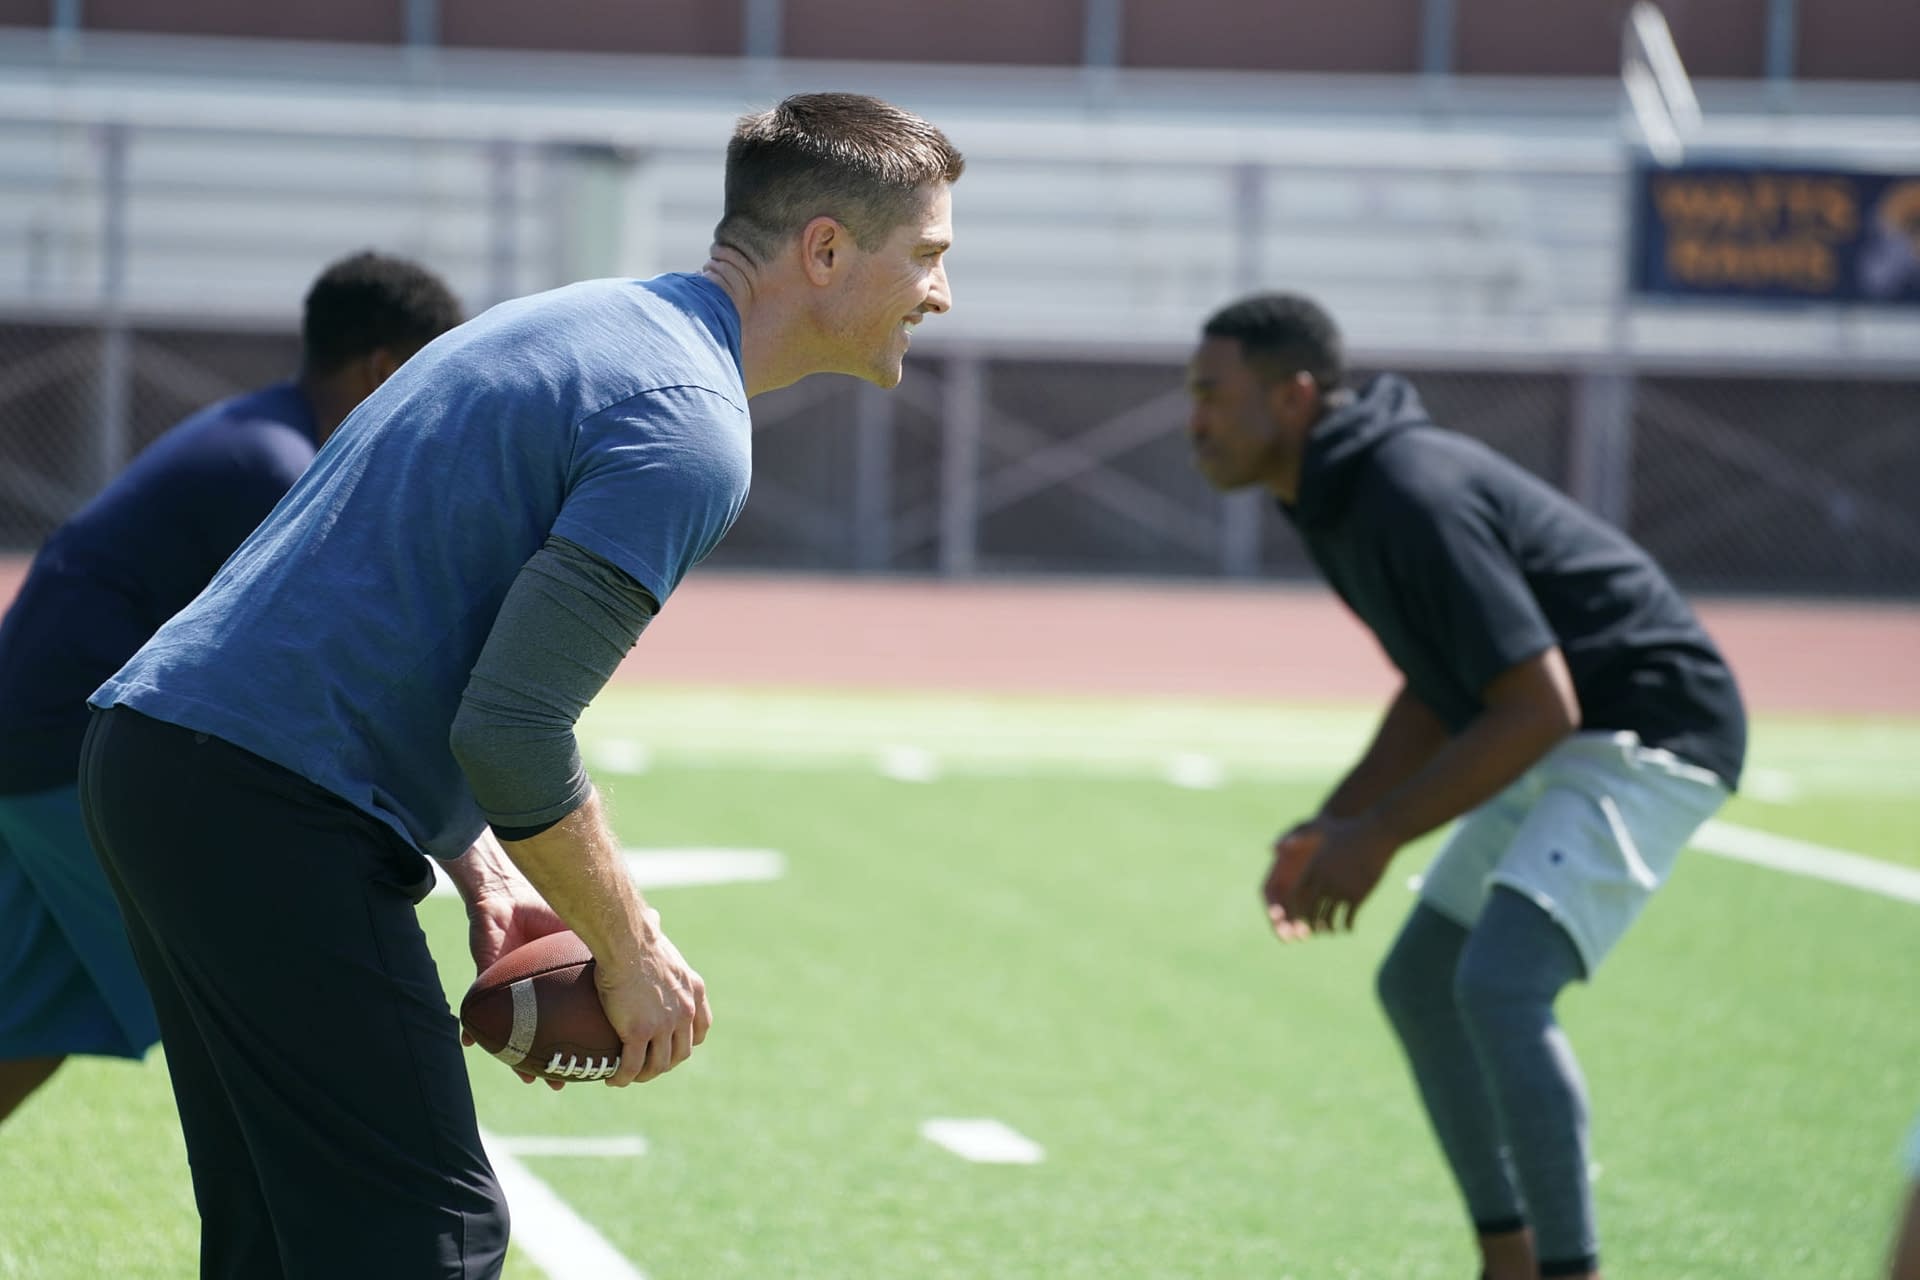 "The Rookie" Season 2 "Safety" Preview: Football Is Apparently A Thing